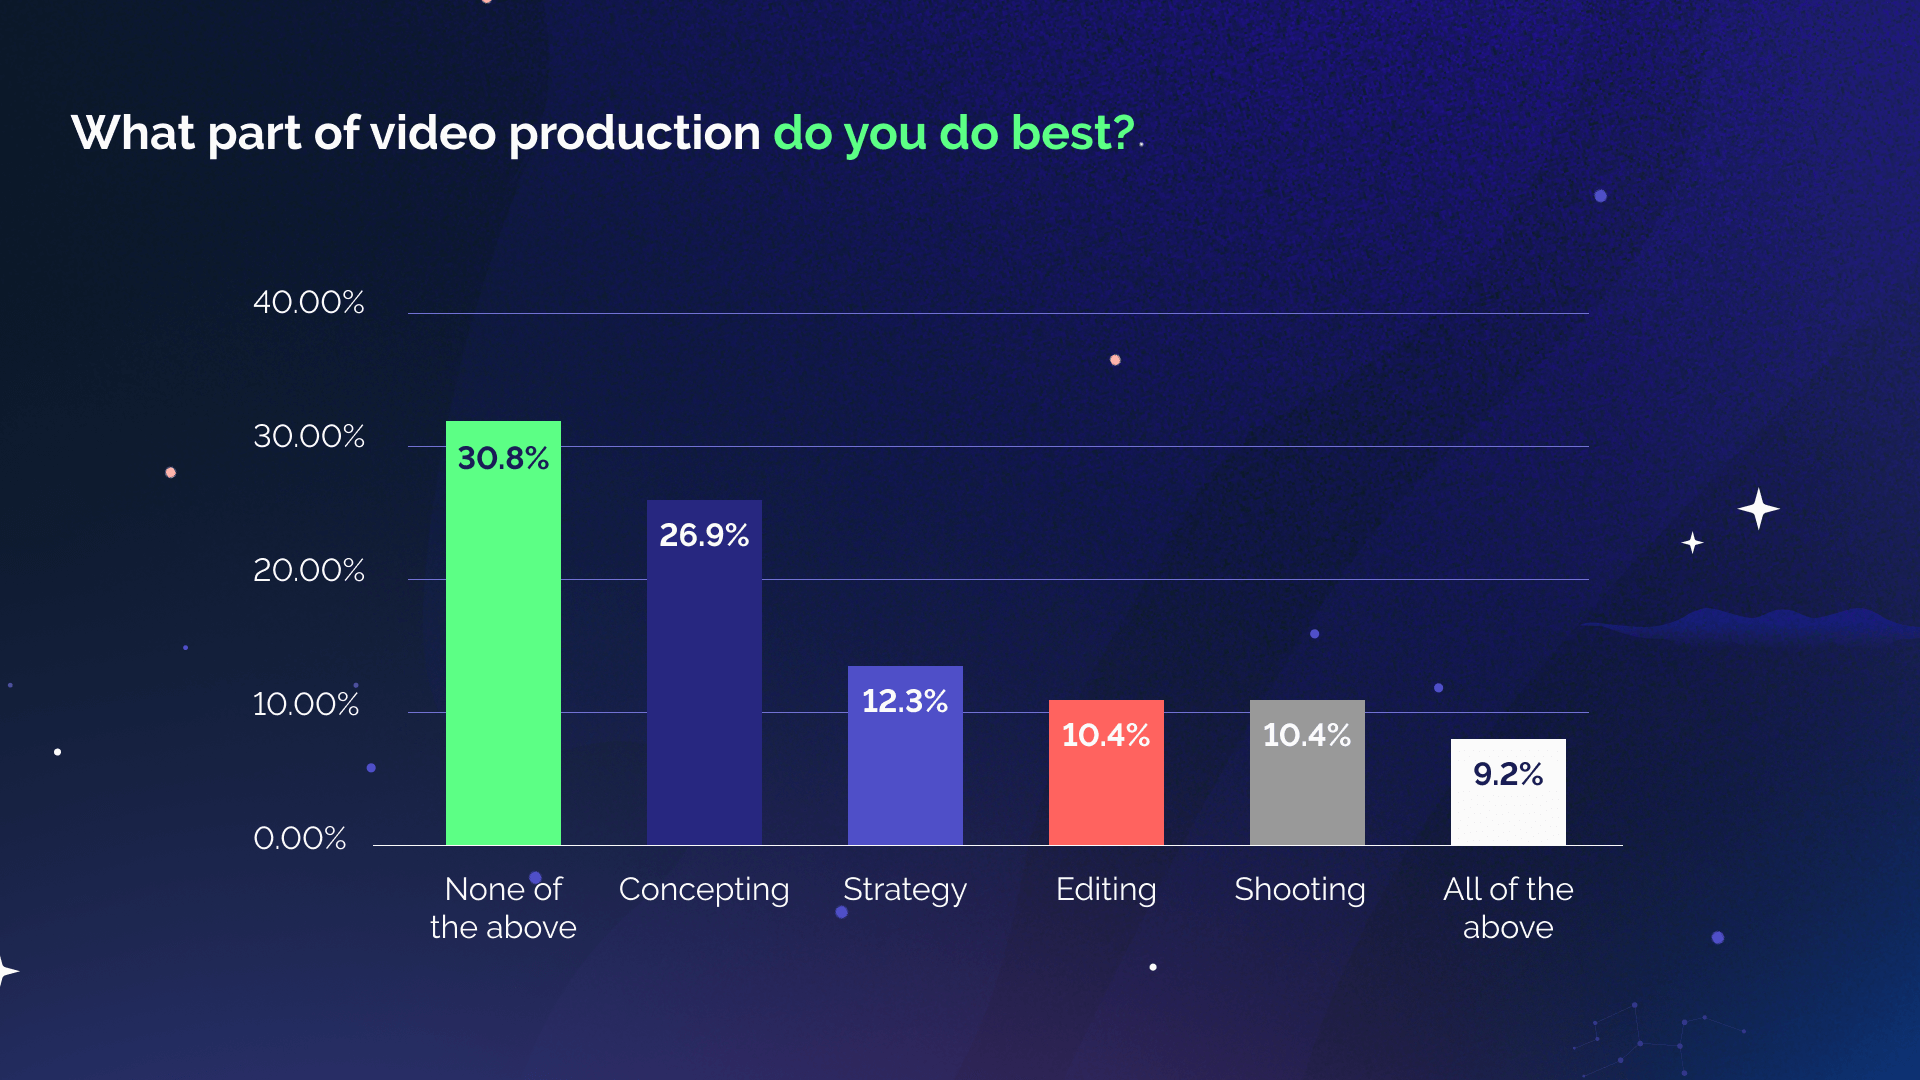 What part of video production do you do best?